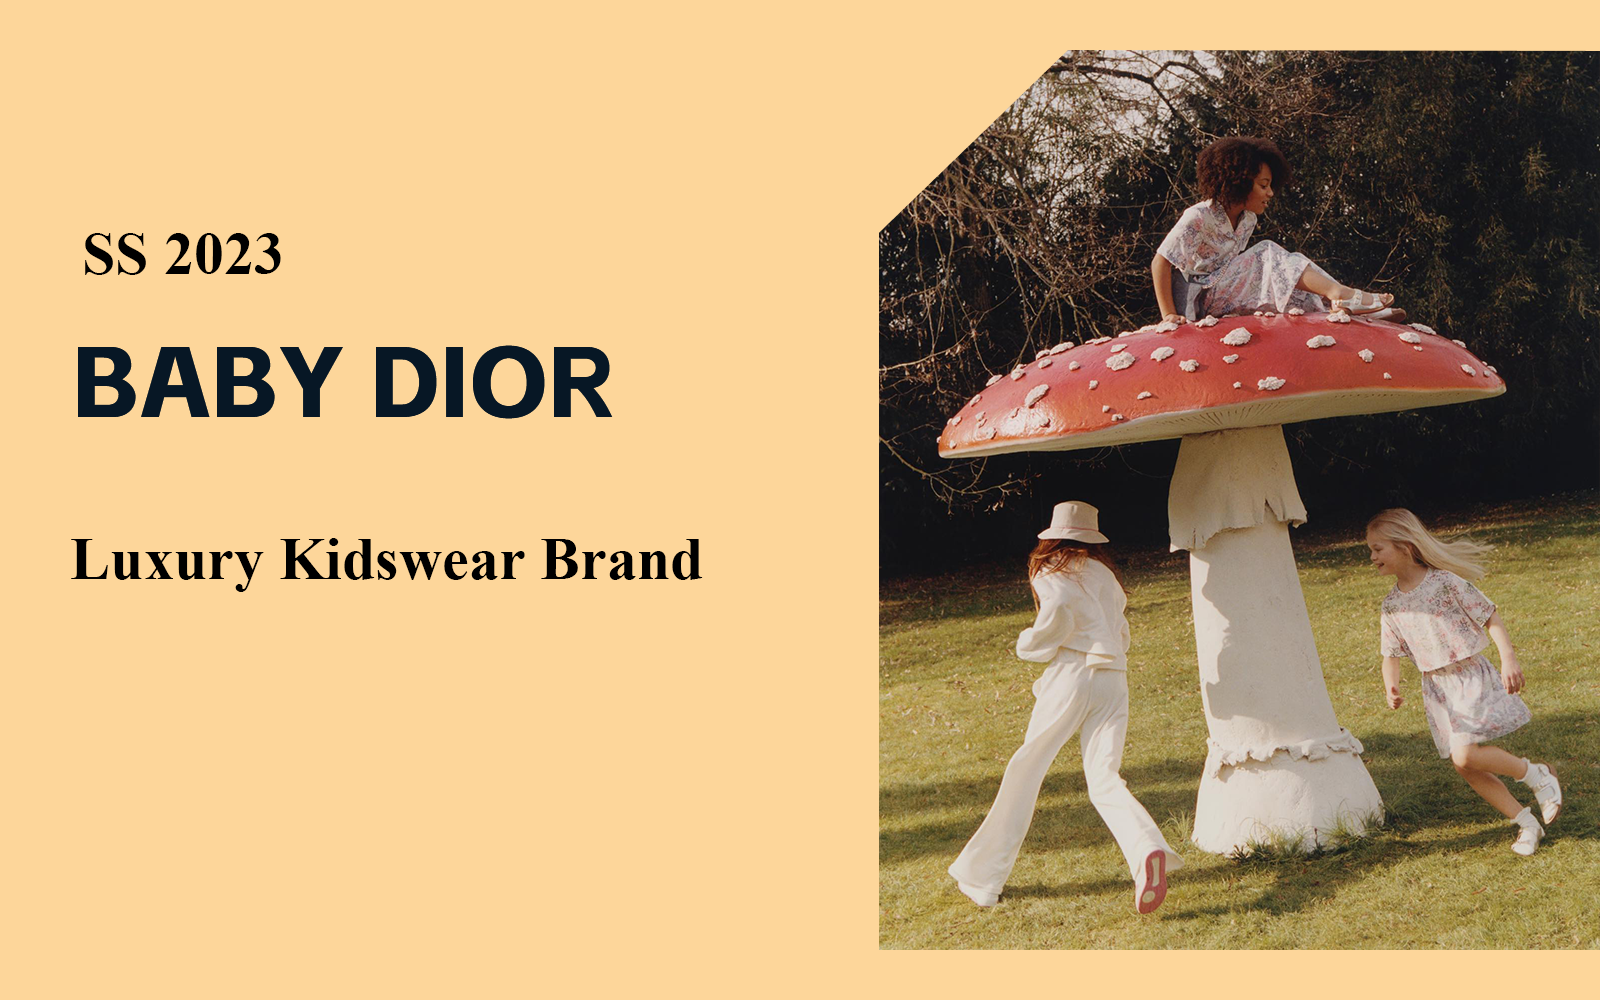 Exploring Nature -- The Analysis of Baby Dior The Luxury Kidswear Brand